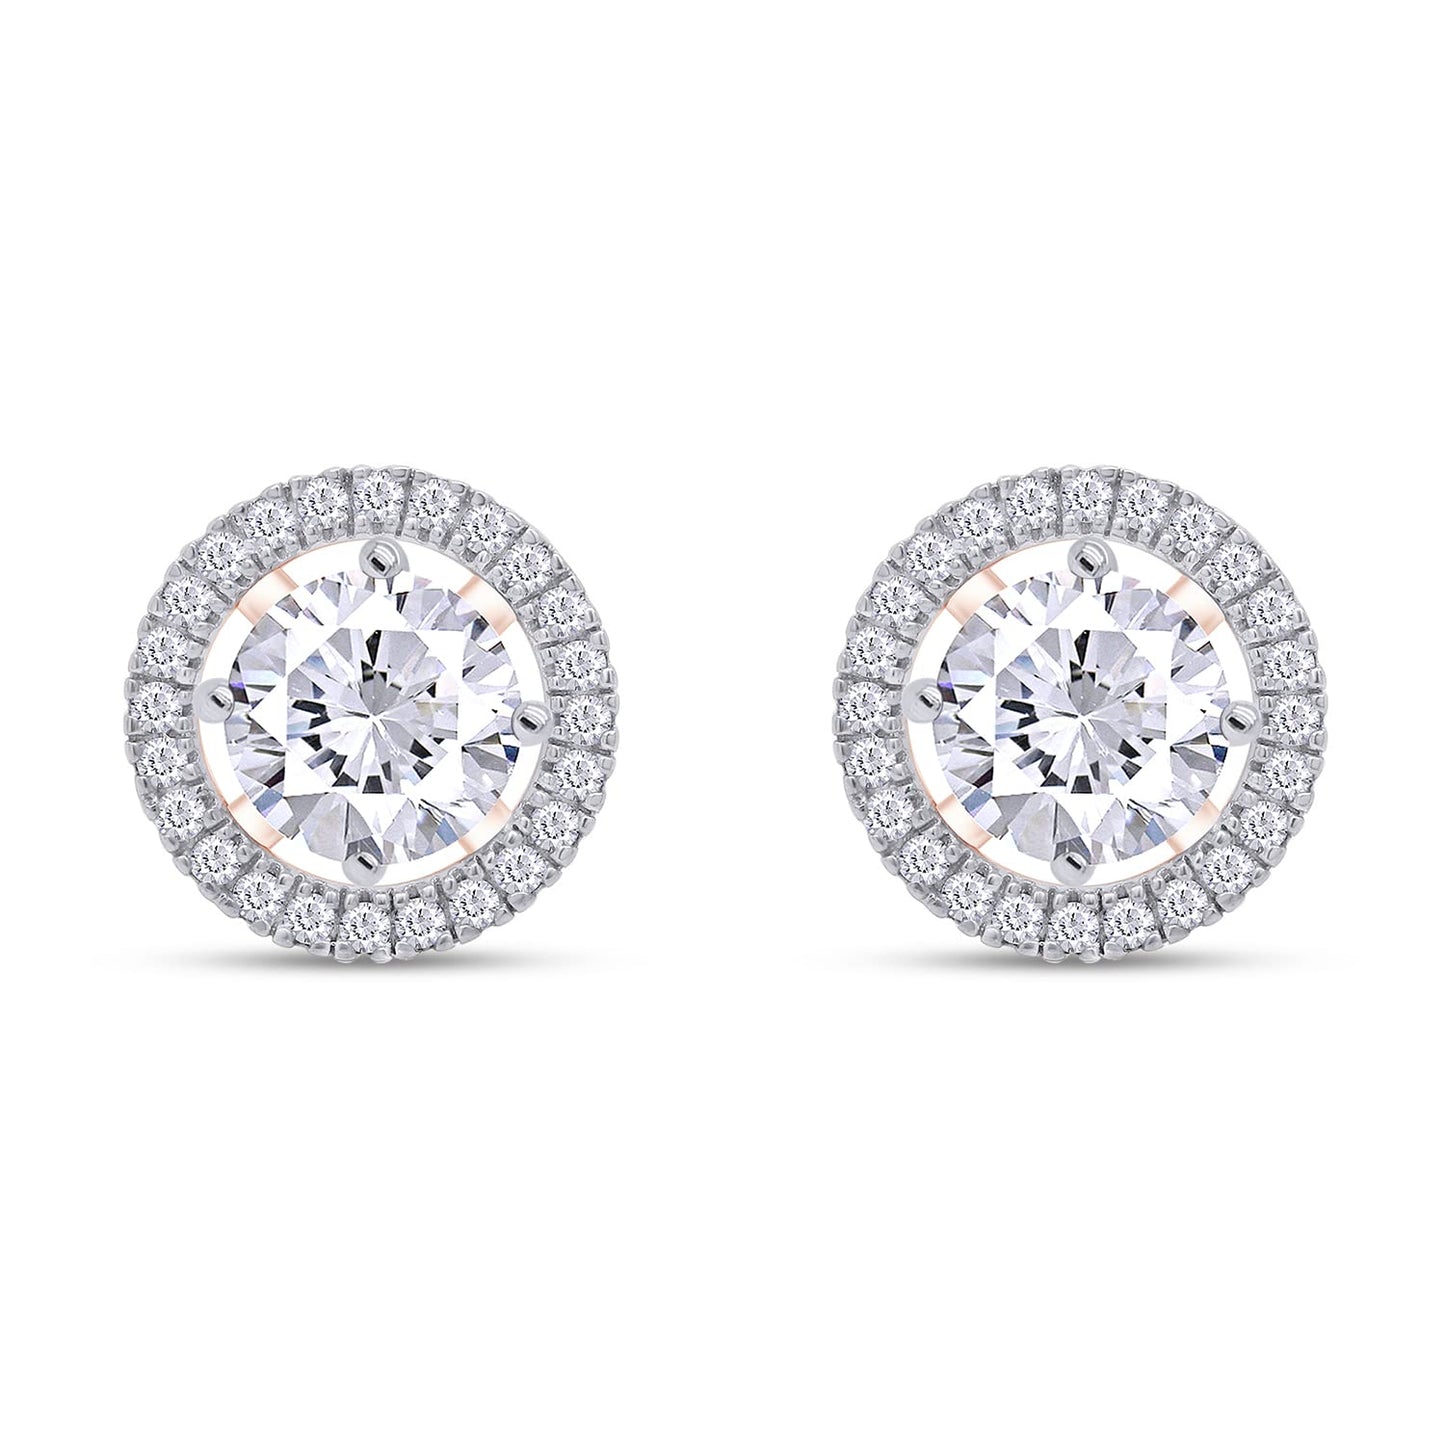 2 Carat Center Stone 6.5MM Round Cut Lab Created Moissanite Diamond Push Back Stud Earrings In 925 Sterling Silver (2 Cttw)